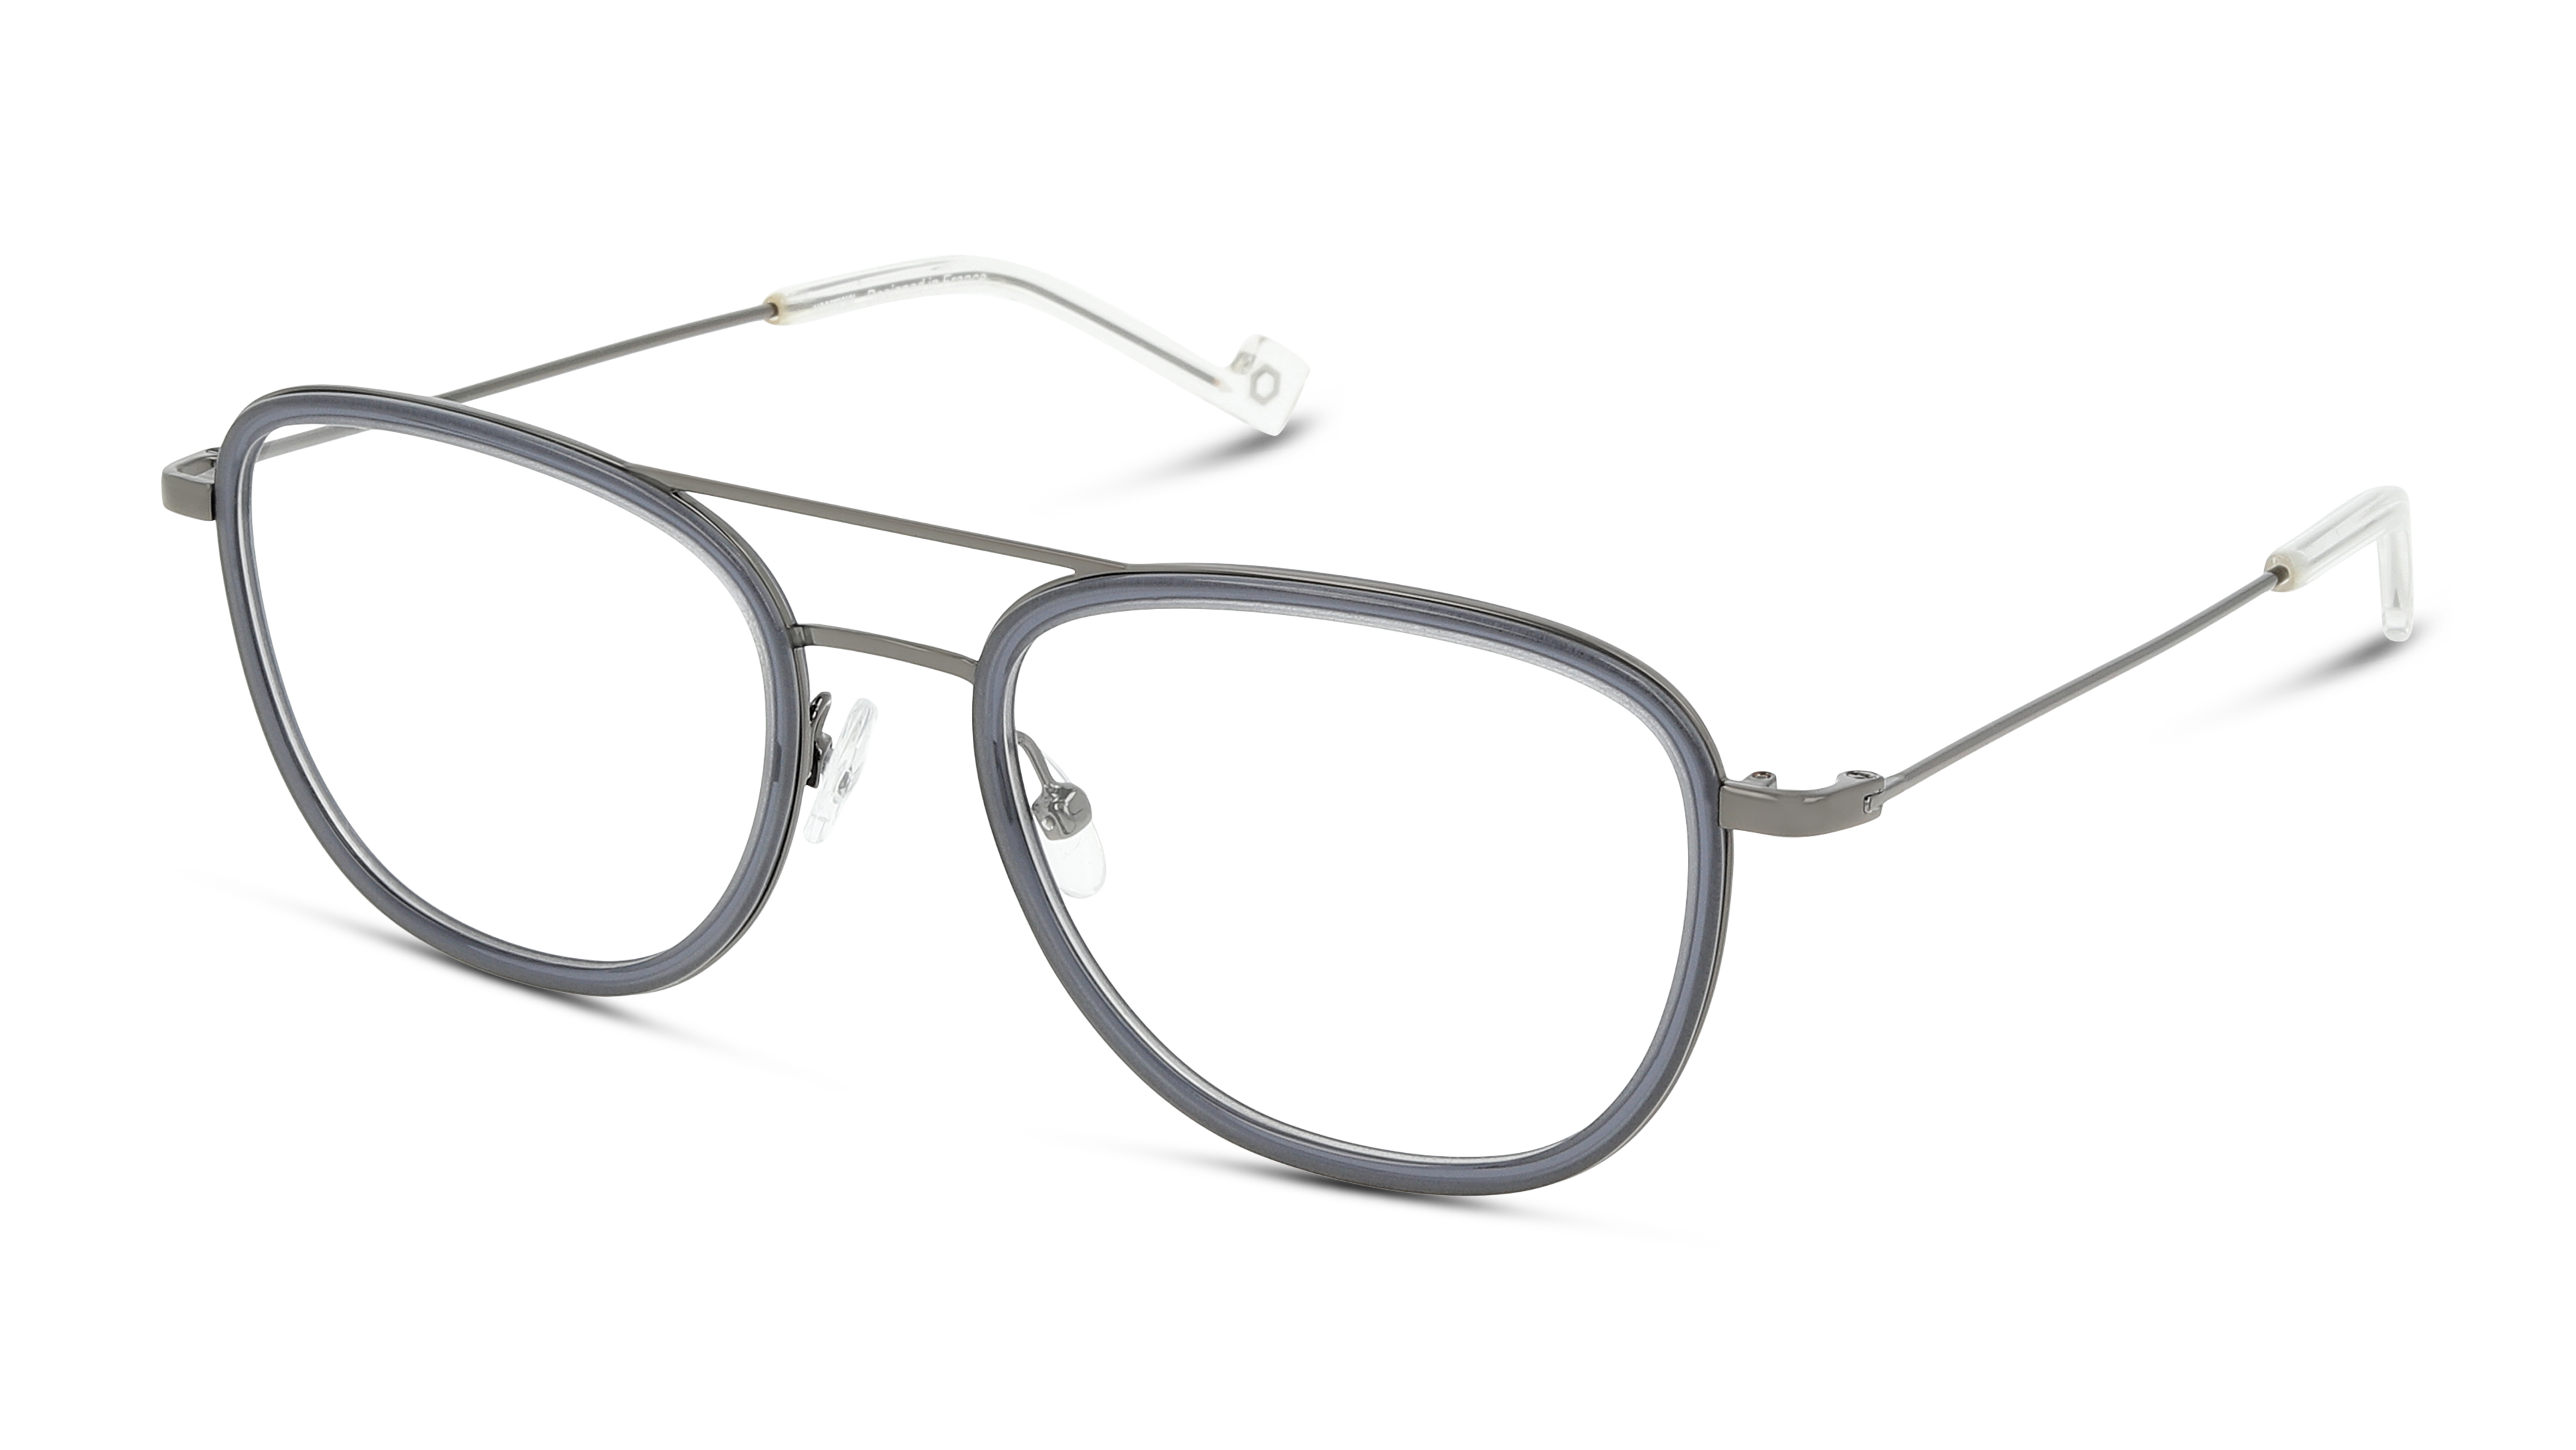 Angle_Left01 Unofficial UNOM0069 Glasses Transparent / Grey